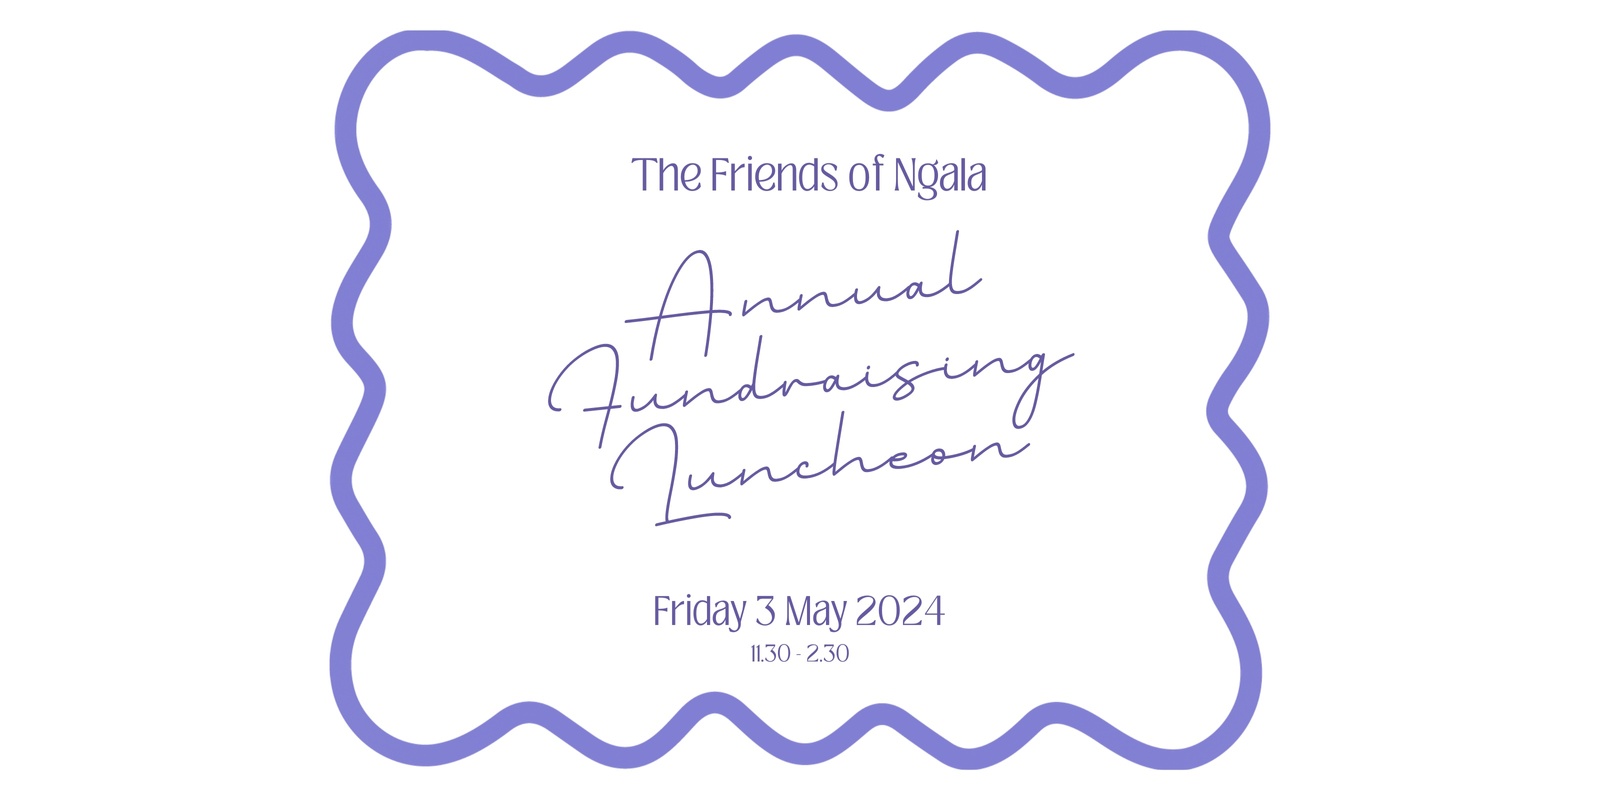 Banner image for The Friends of Ngala Annual Fundraising Luncheon